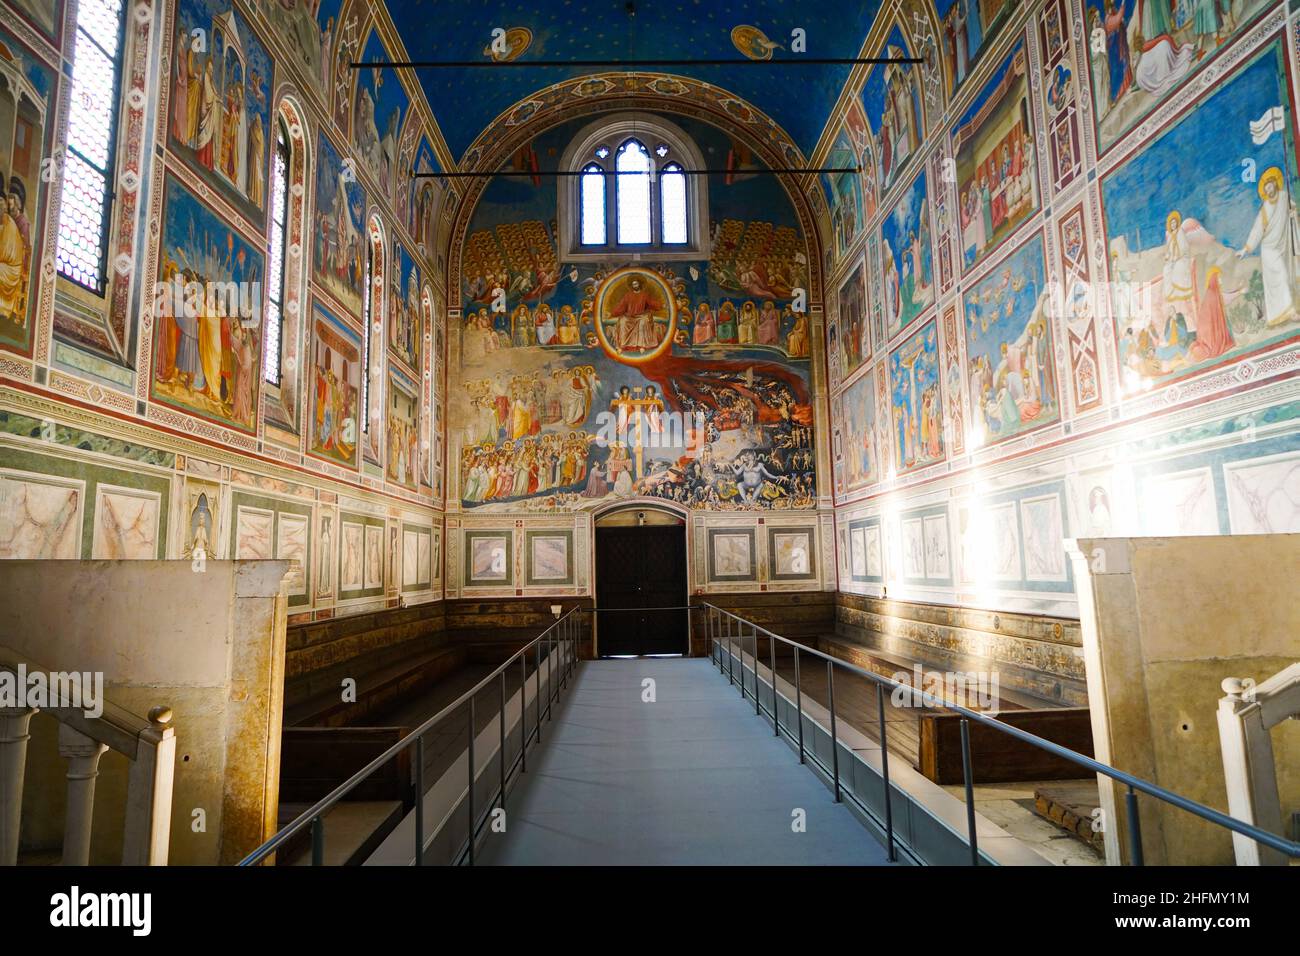 View of the landmark Scrovegni Chapel (Cappella degli Scrovegni, Arena Chapel), part of the Museo Civico of Padua, with a fresco cycle by Giotto compl Stock Photo